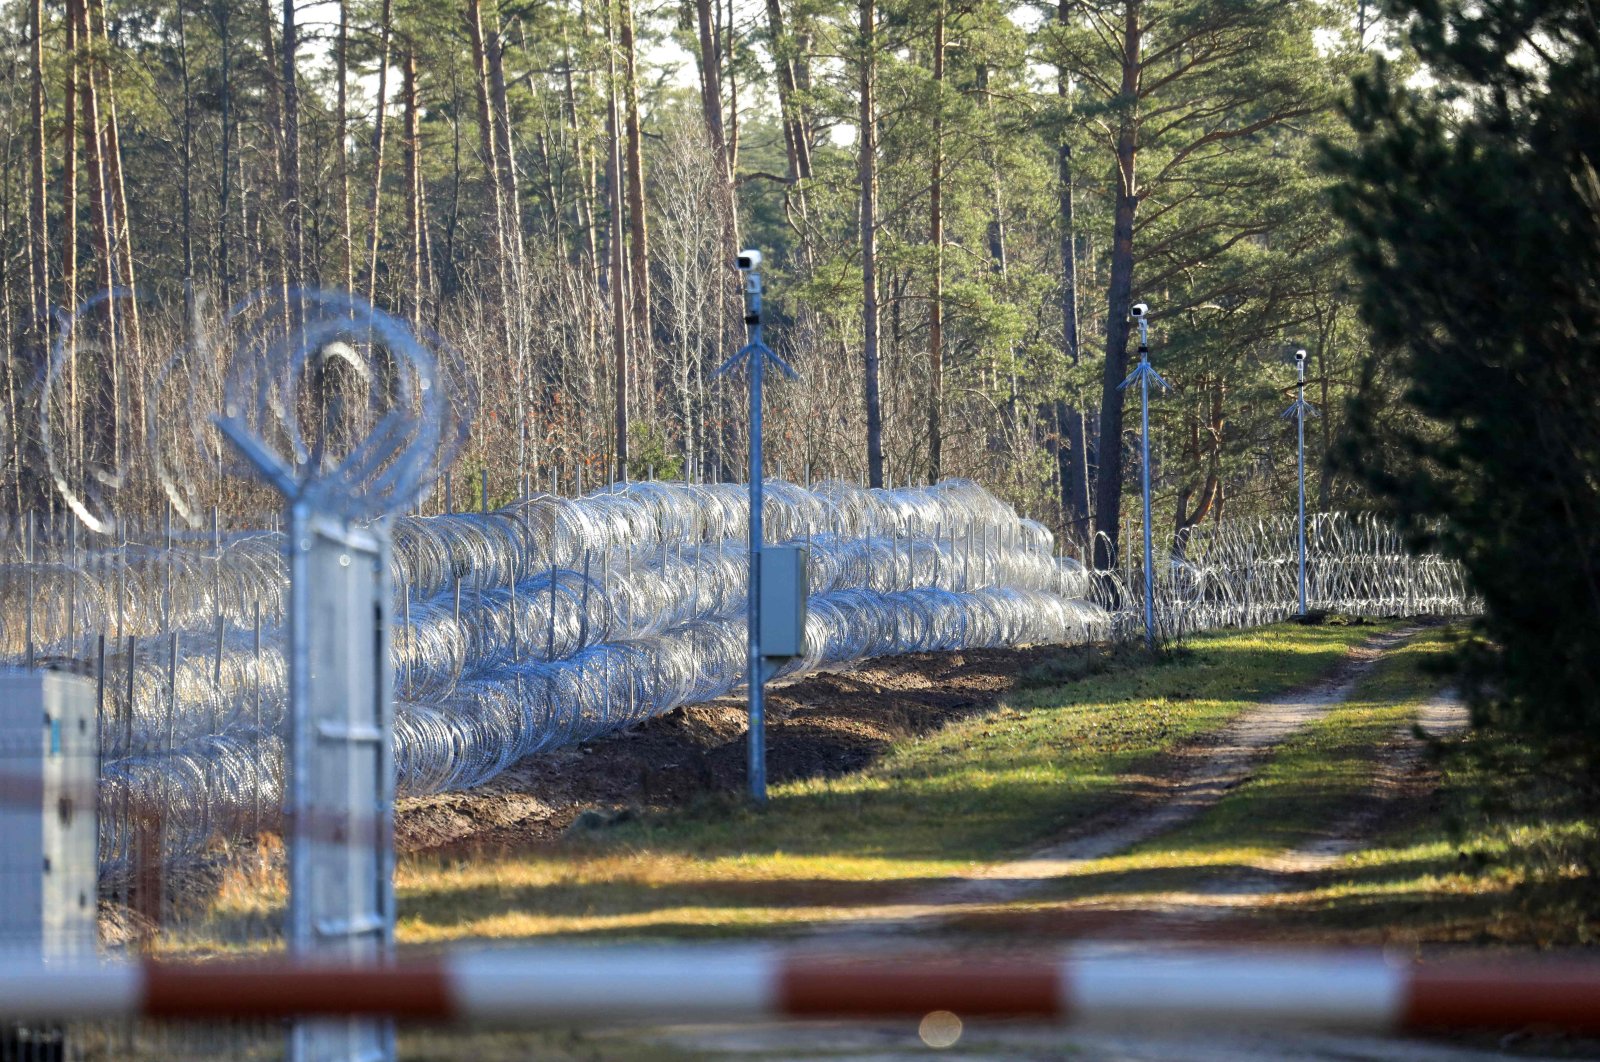 Barbed wire fence is pictured at the Lithuanian- Belarusian border in Sadziunai, Lithuania, on November 22, 2021. (Photo by PETRAS MALUKAS / AFP)